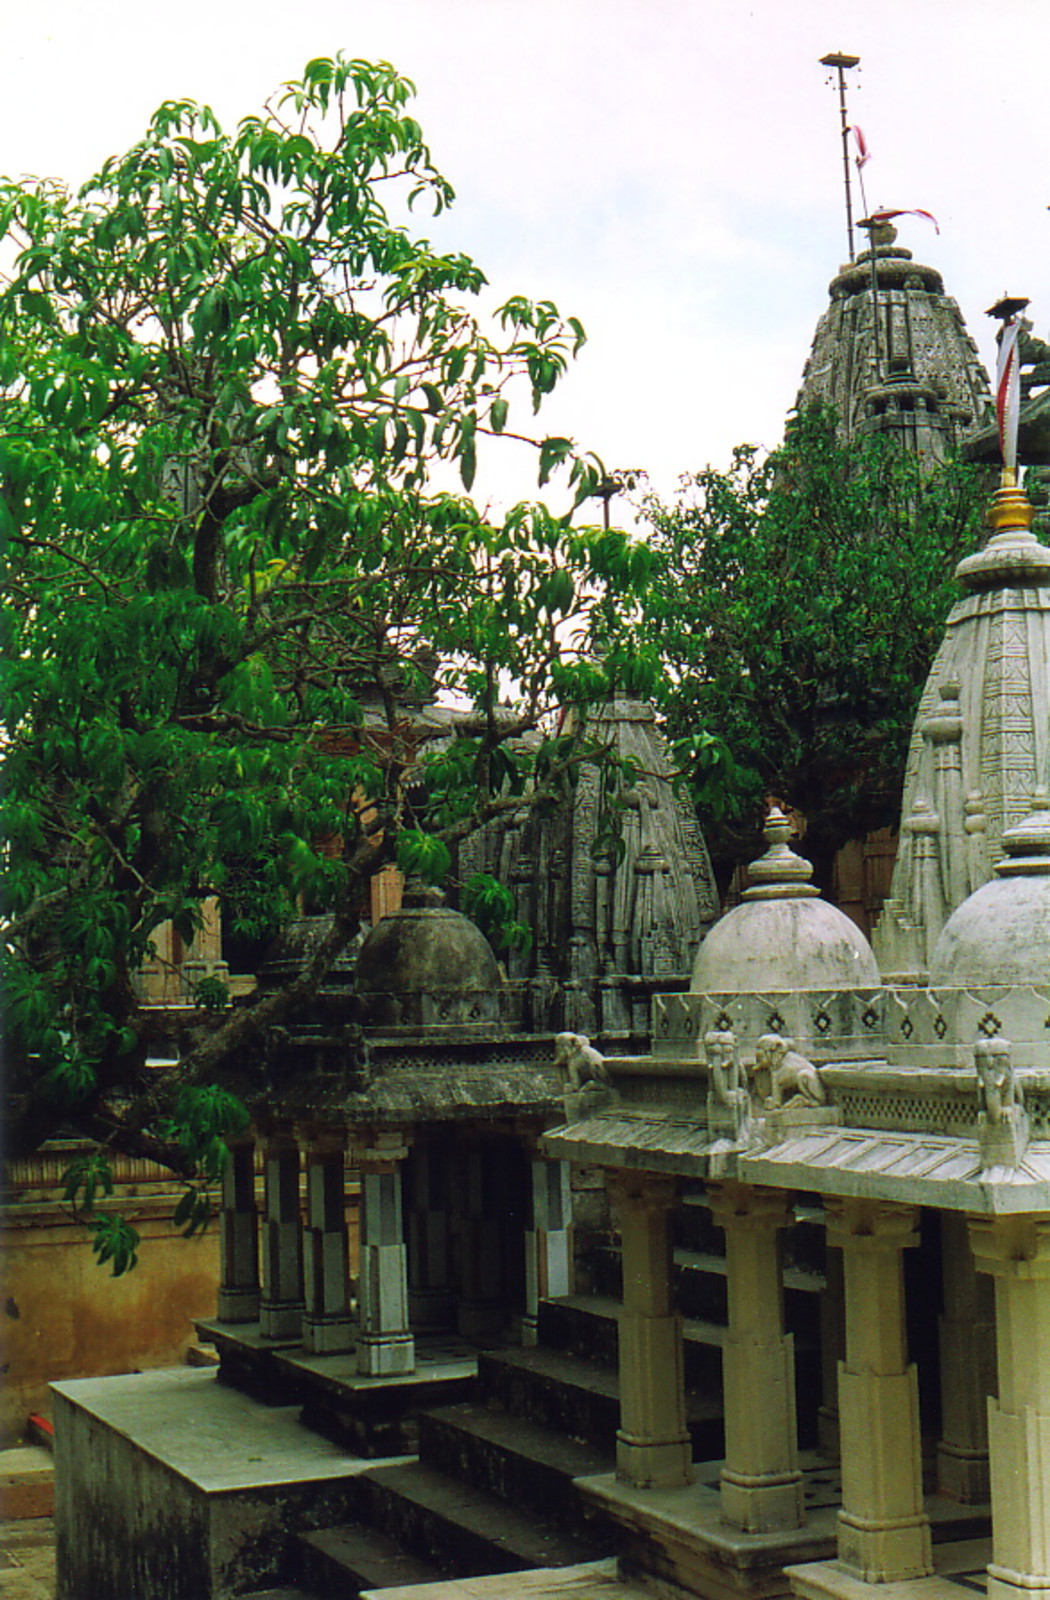 Temples and trees at Palitana